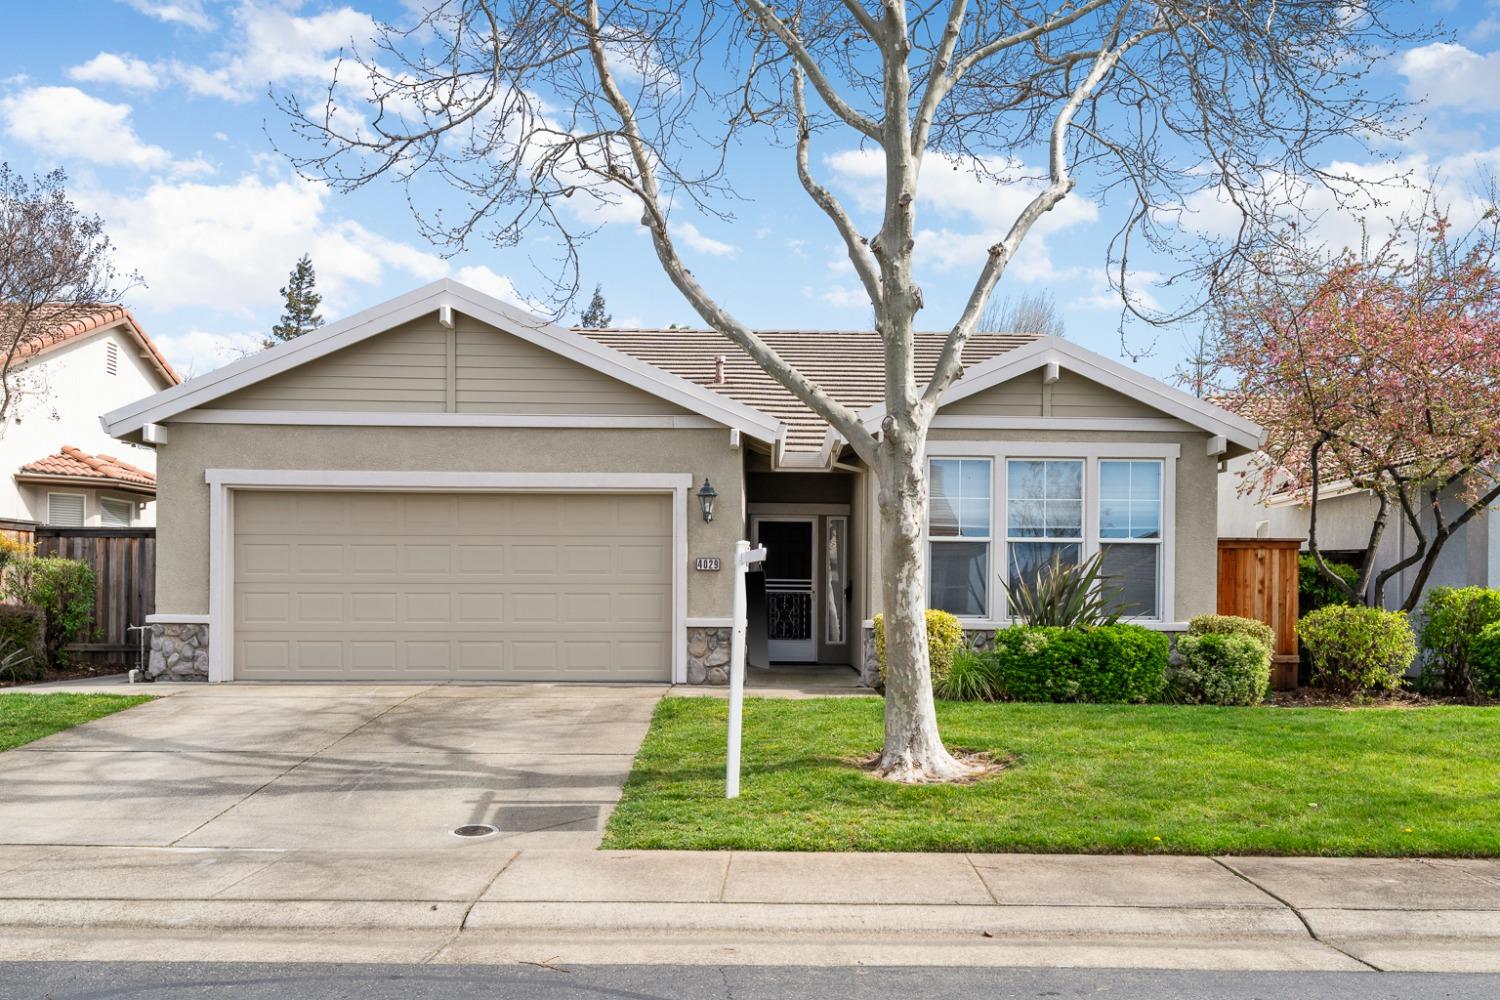 Photo of 4029 Coldwater Dr in Rocklin, CA